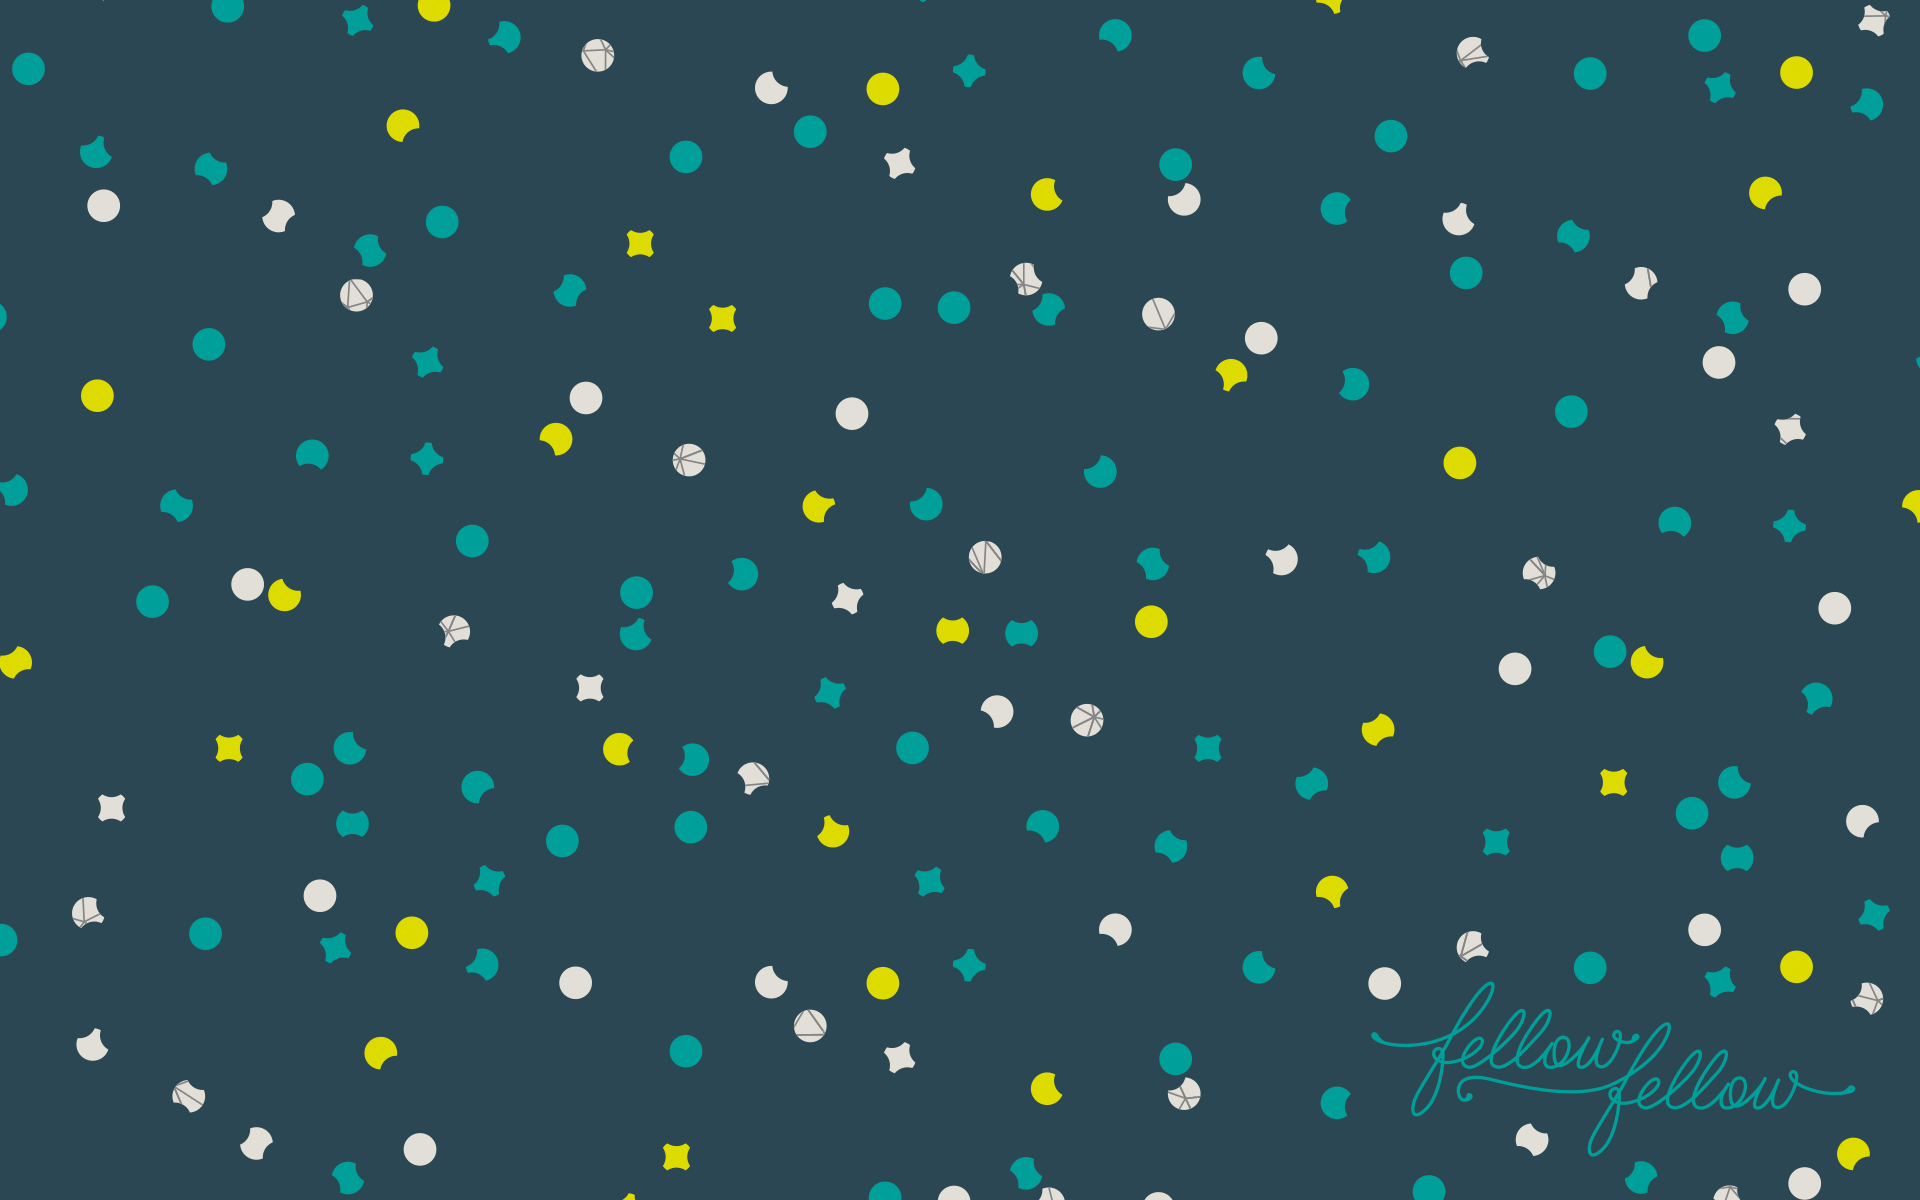 Teal Backgrounds download free | Wallpapers, Backgrounds, Images ...